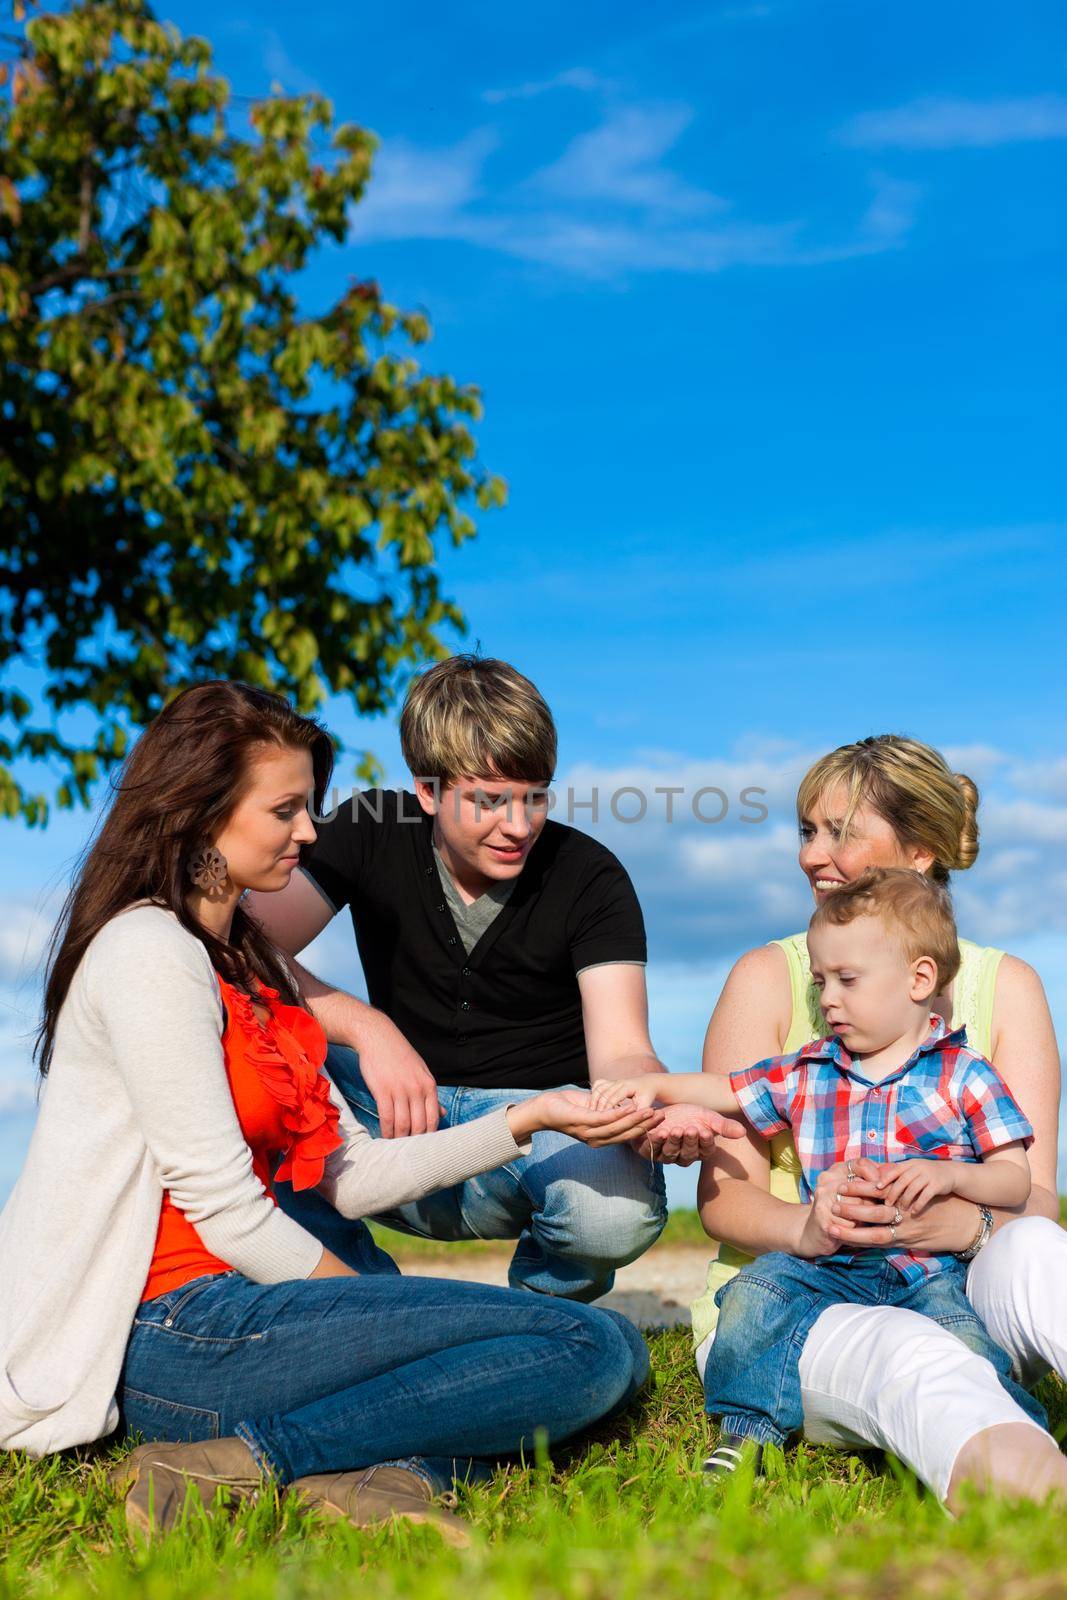 Family - Grandmother, mother, father and child sitting and playing in garden